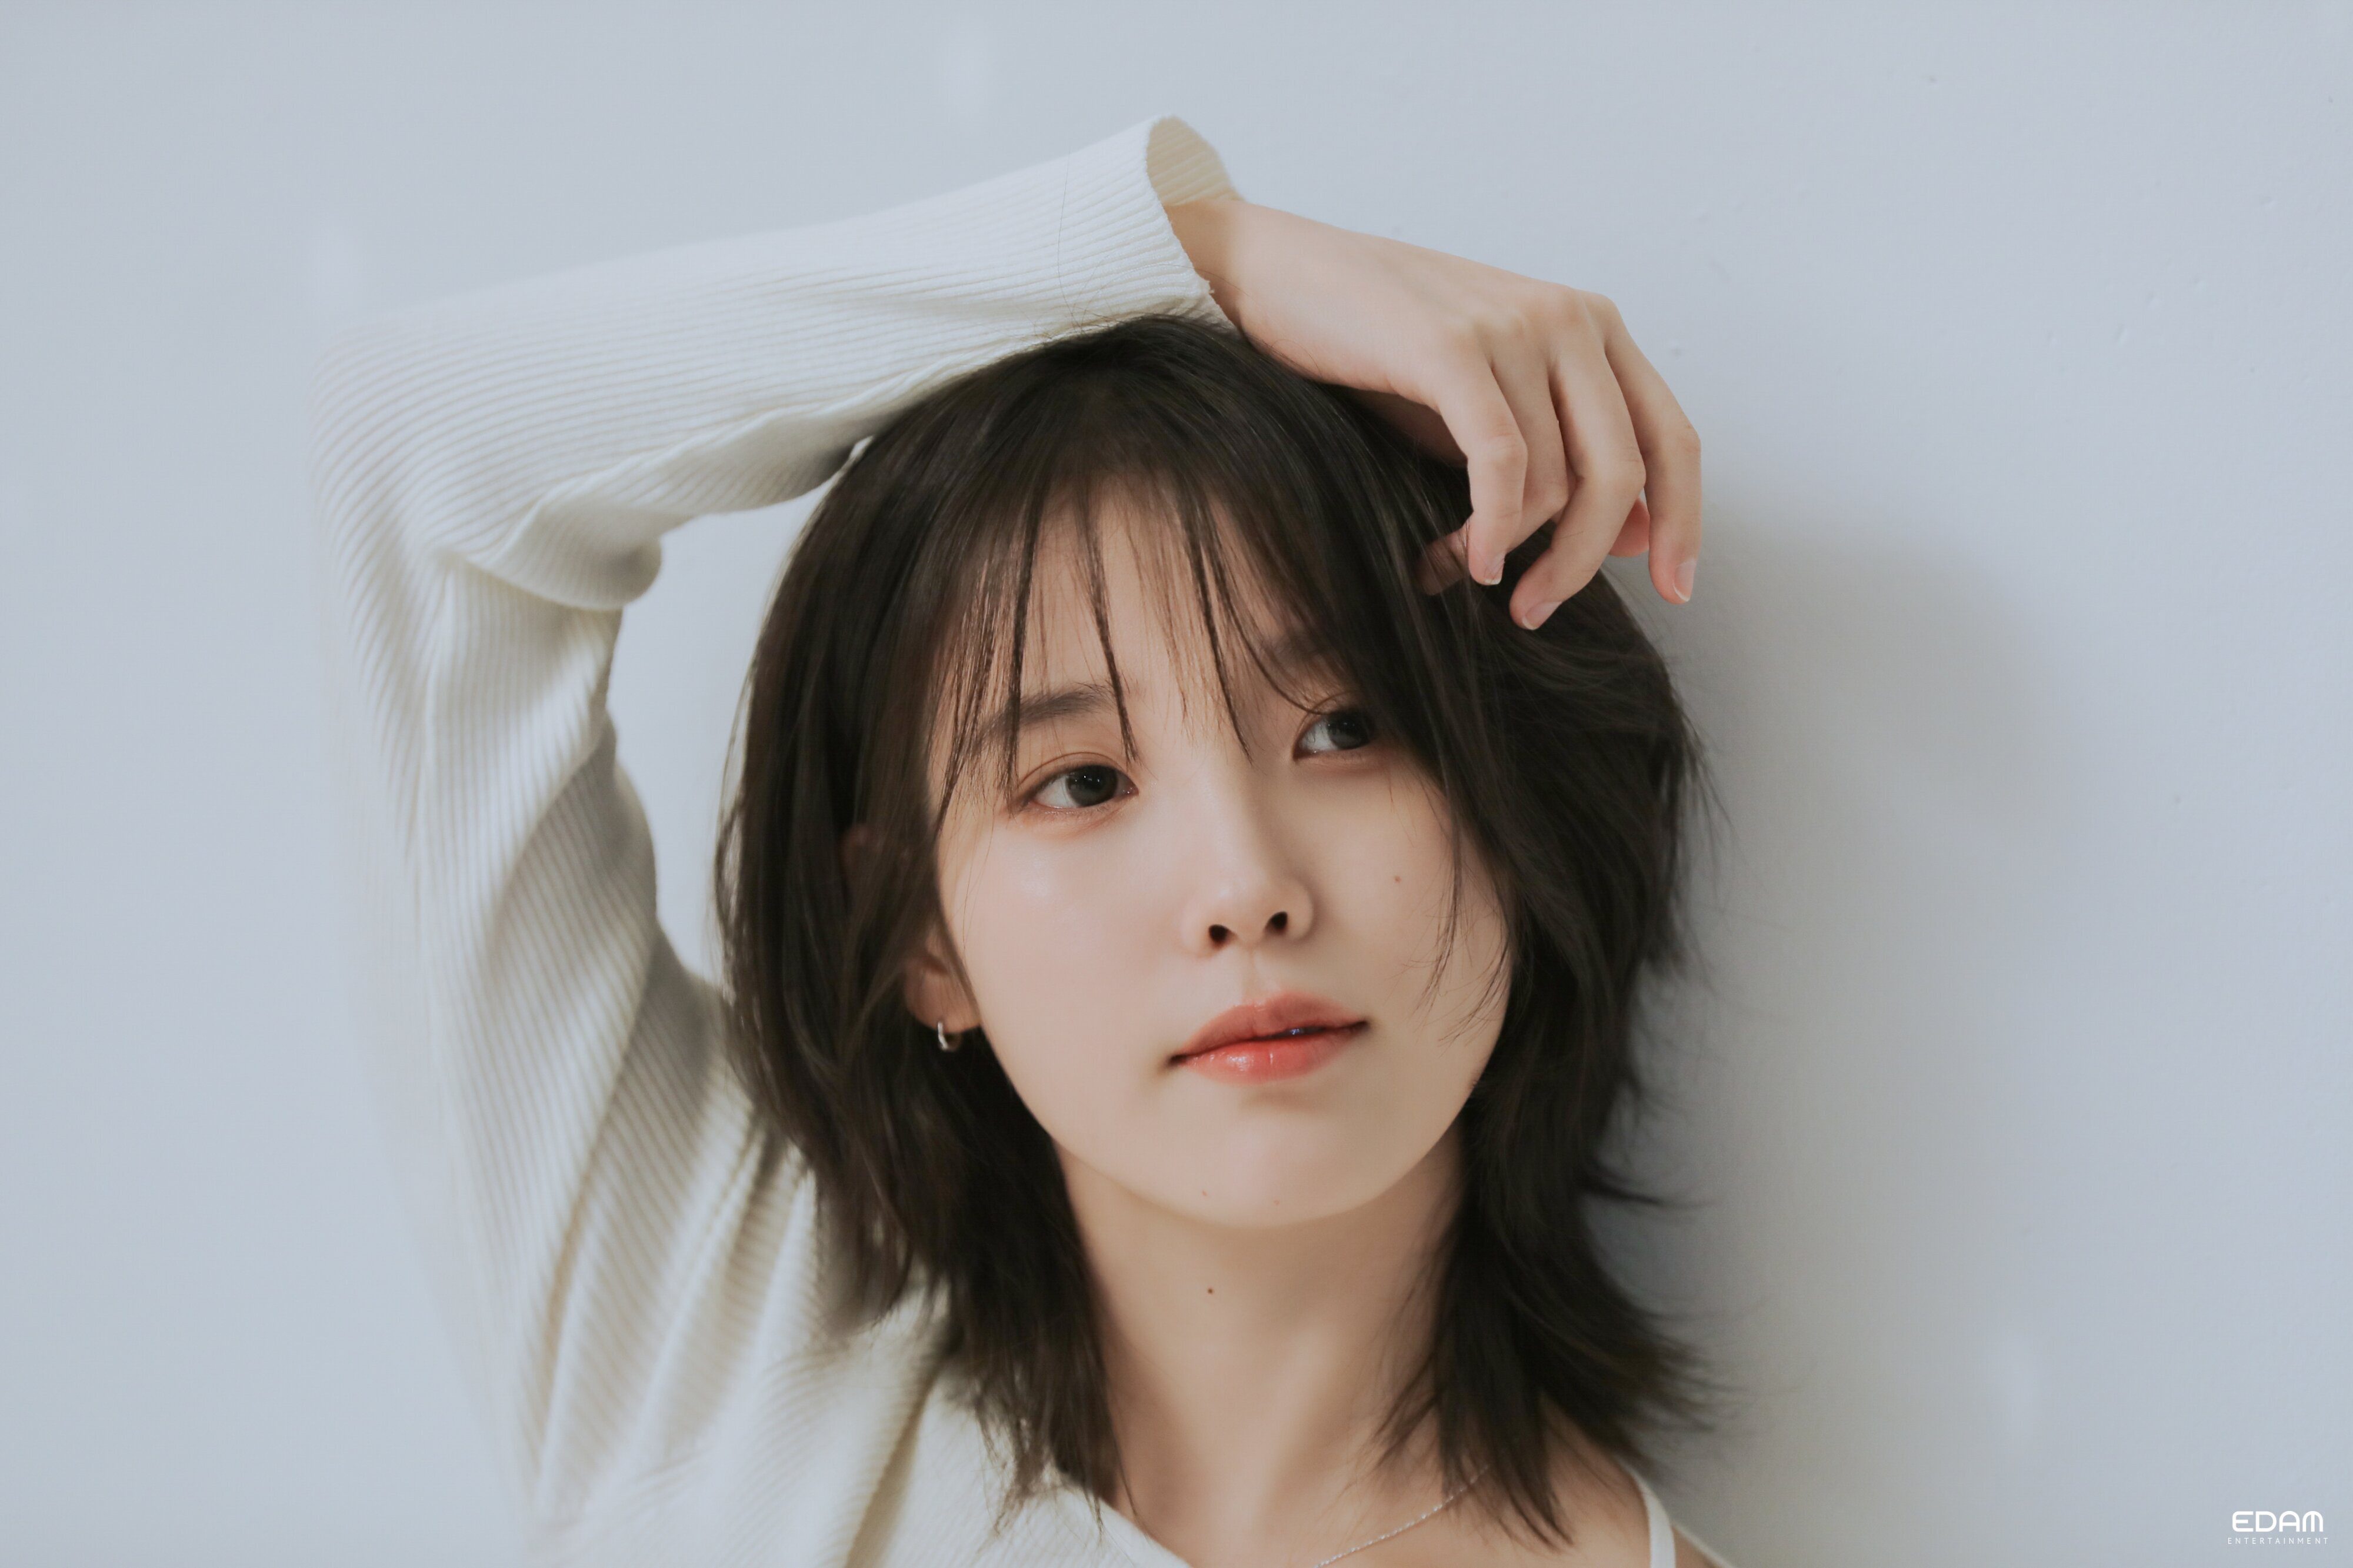 IU announces 2024 world tour "H.E.R", to visit cities in Asia, Europe